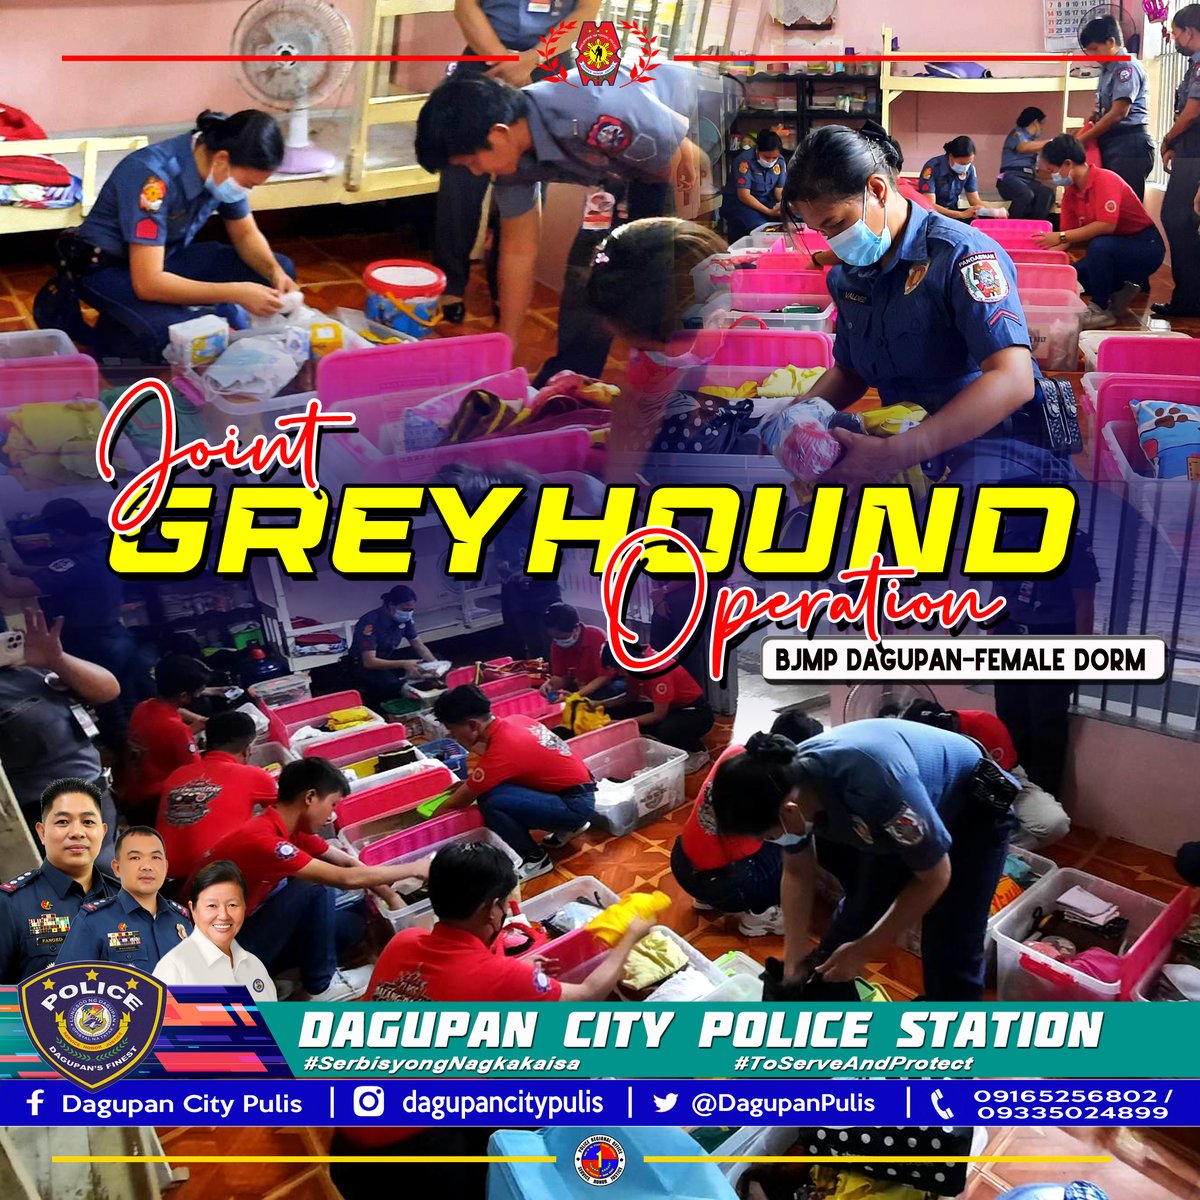 Personnel of Dagupan City Police Station, under the direct supervision of PLTCOL BRENDON B PALISOC, OIC, personnel of Female Dorm BJMP Dagupan, and their OJT criminology students, conducted Joint Greyhound Operation at said facility located at Bonuan Gueset, Dagupan City.